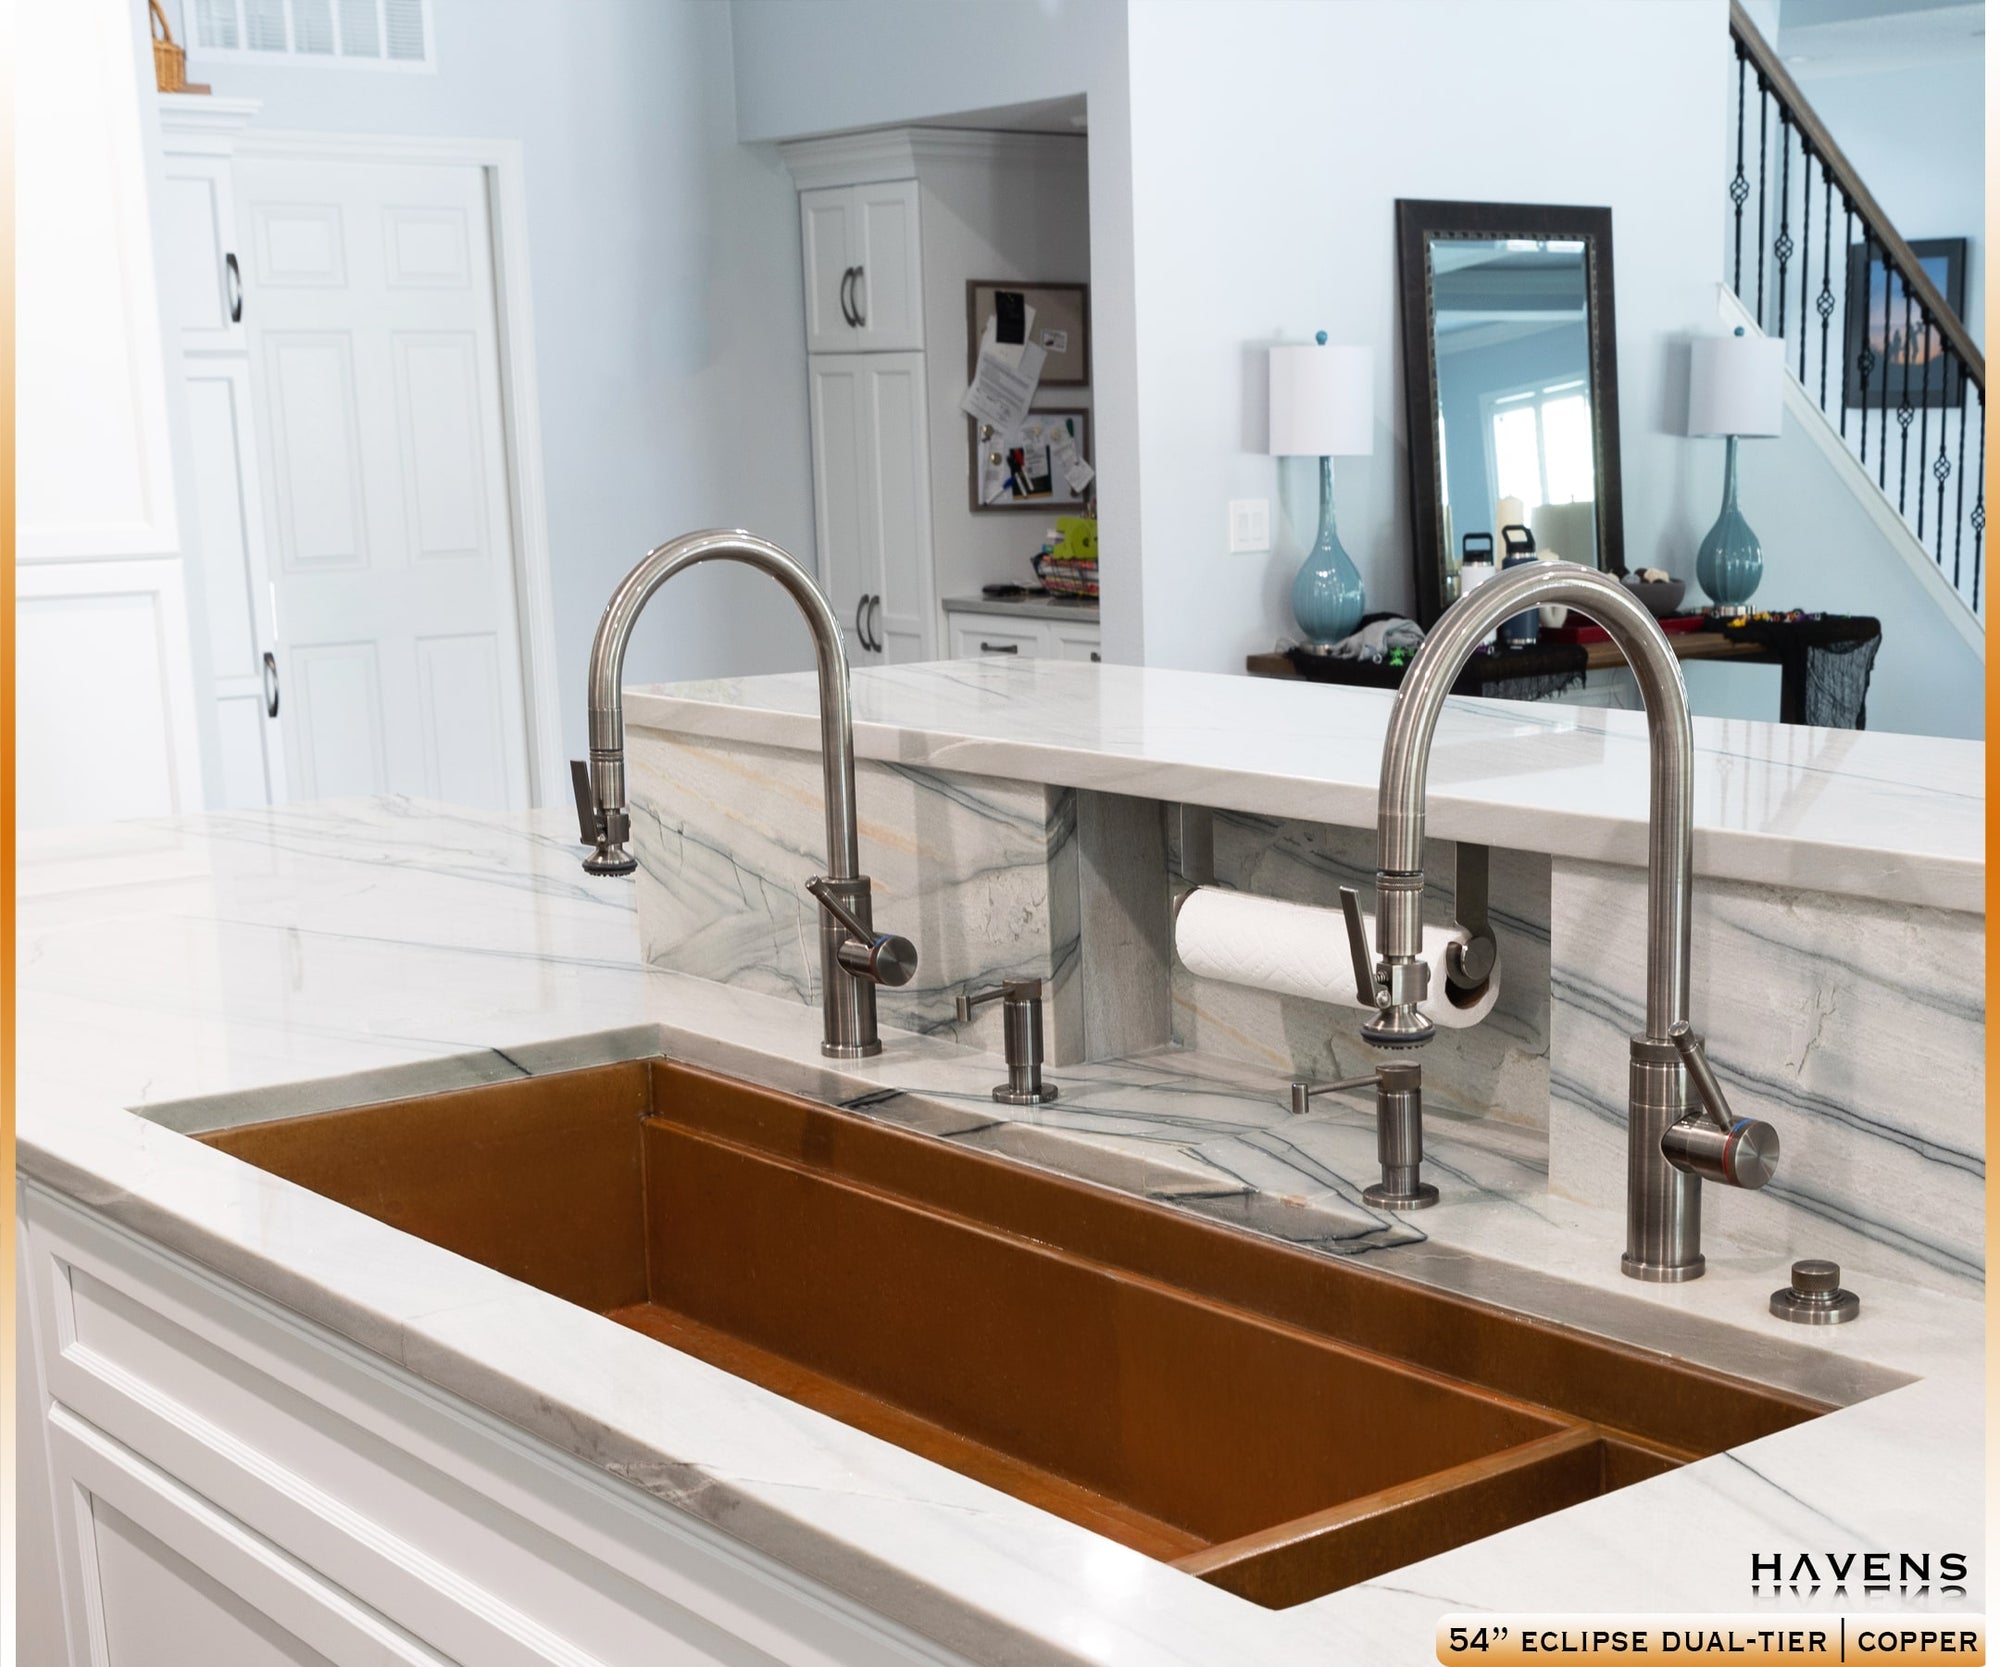 Custom Double Drainboard Sink - Pure Copper - Havens